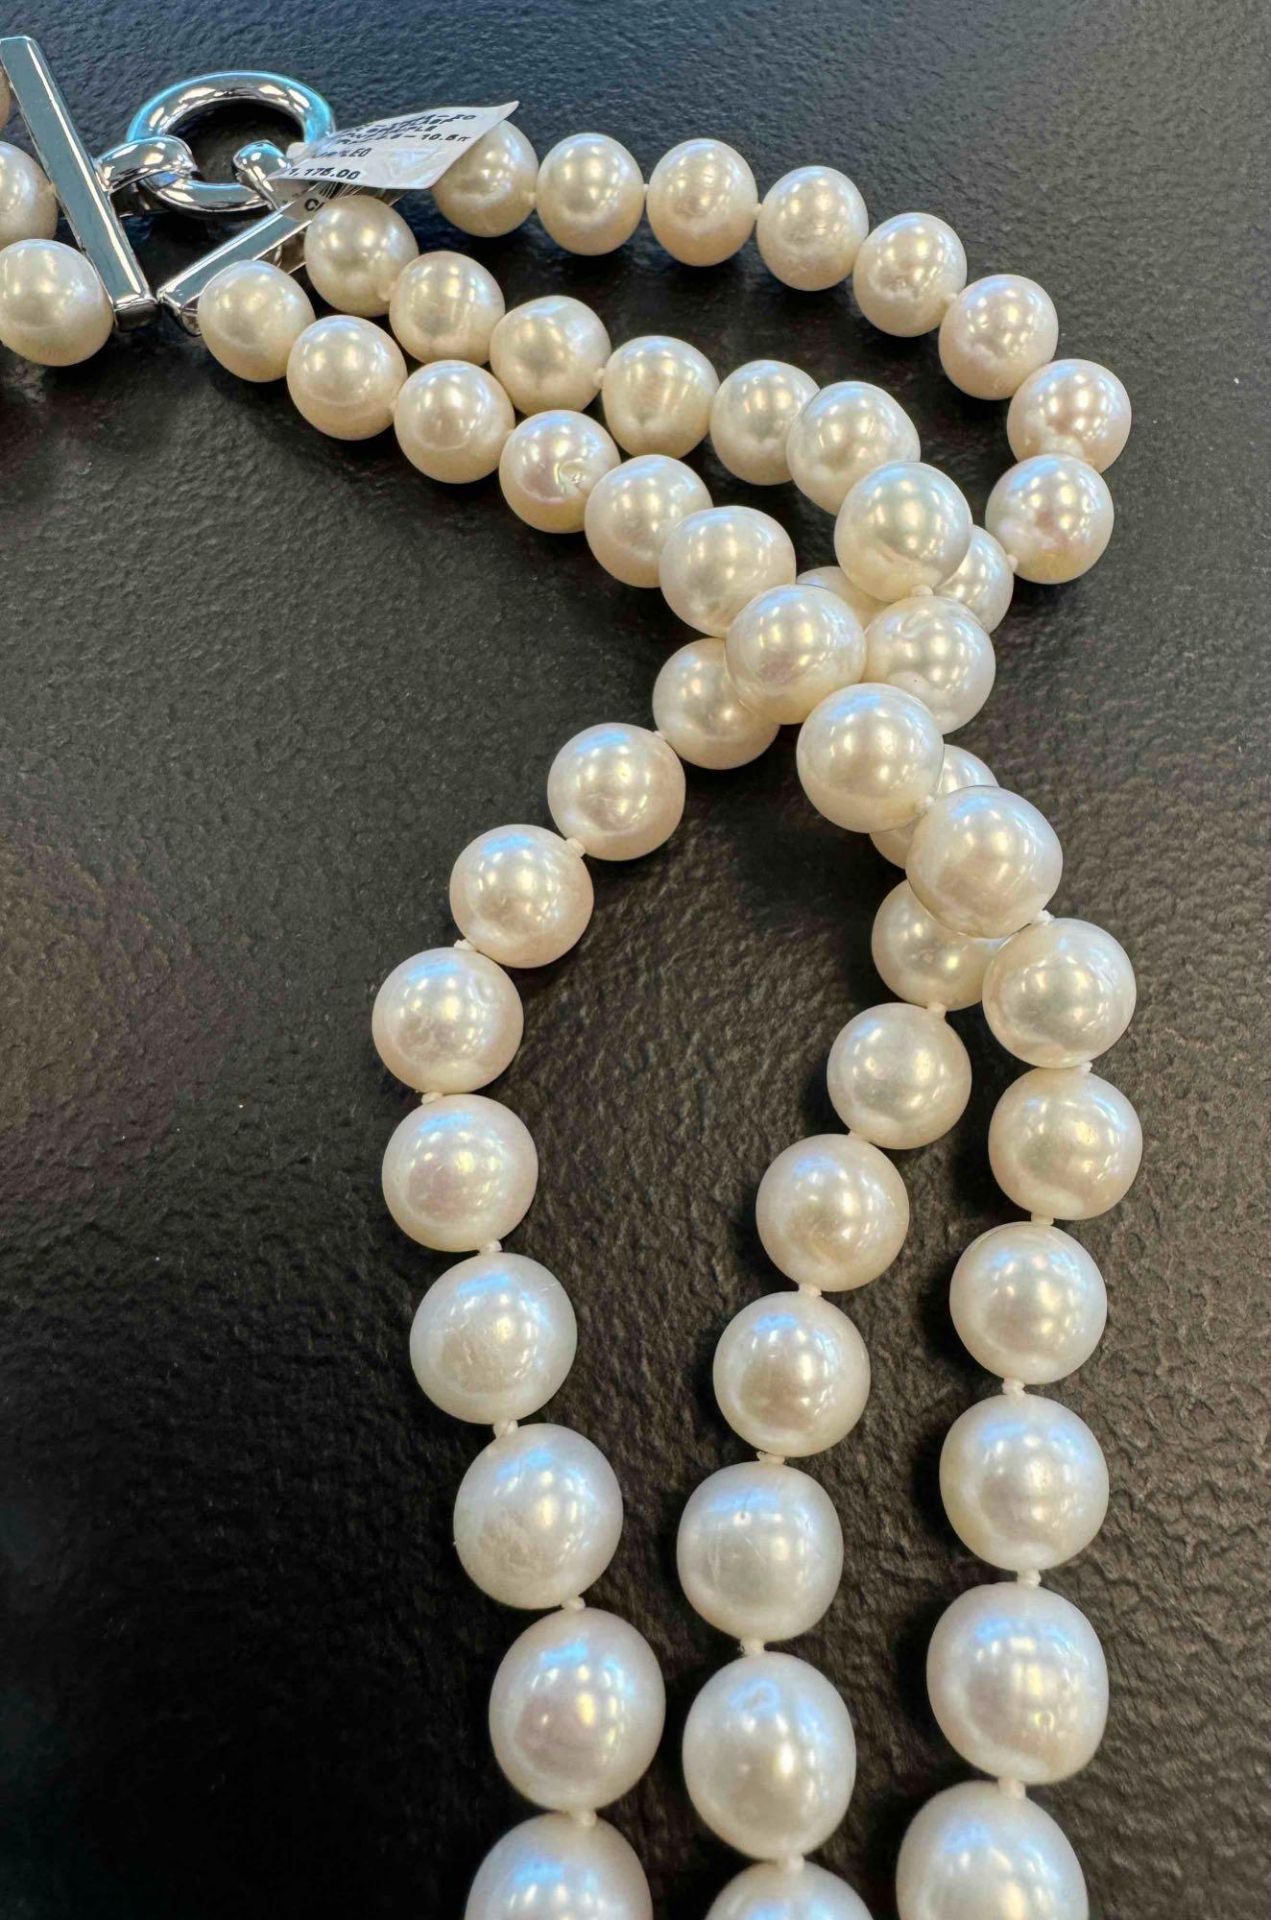 3 Strand Pearl Necklaces $1200 Retail - Image 3 of 5